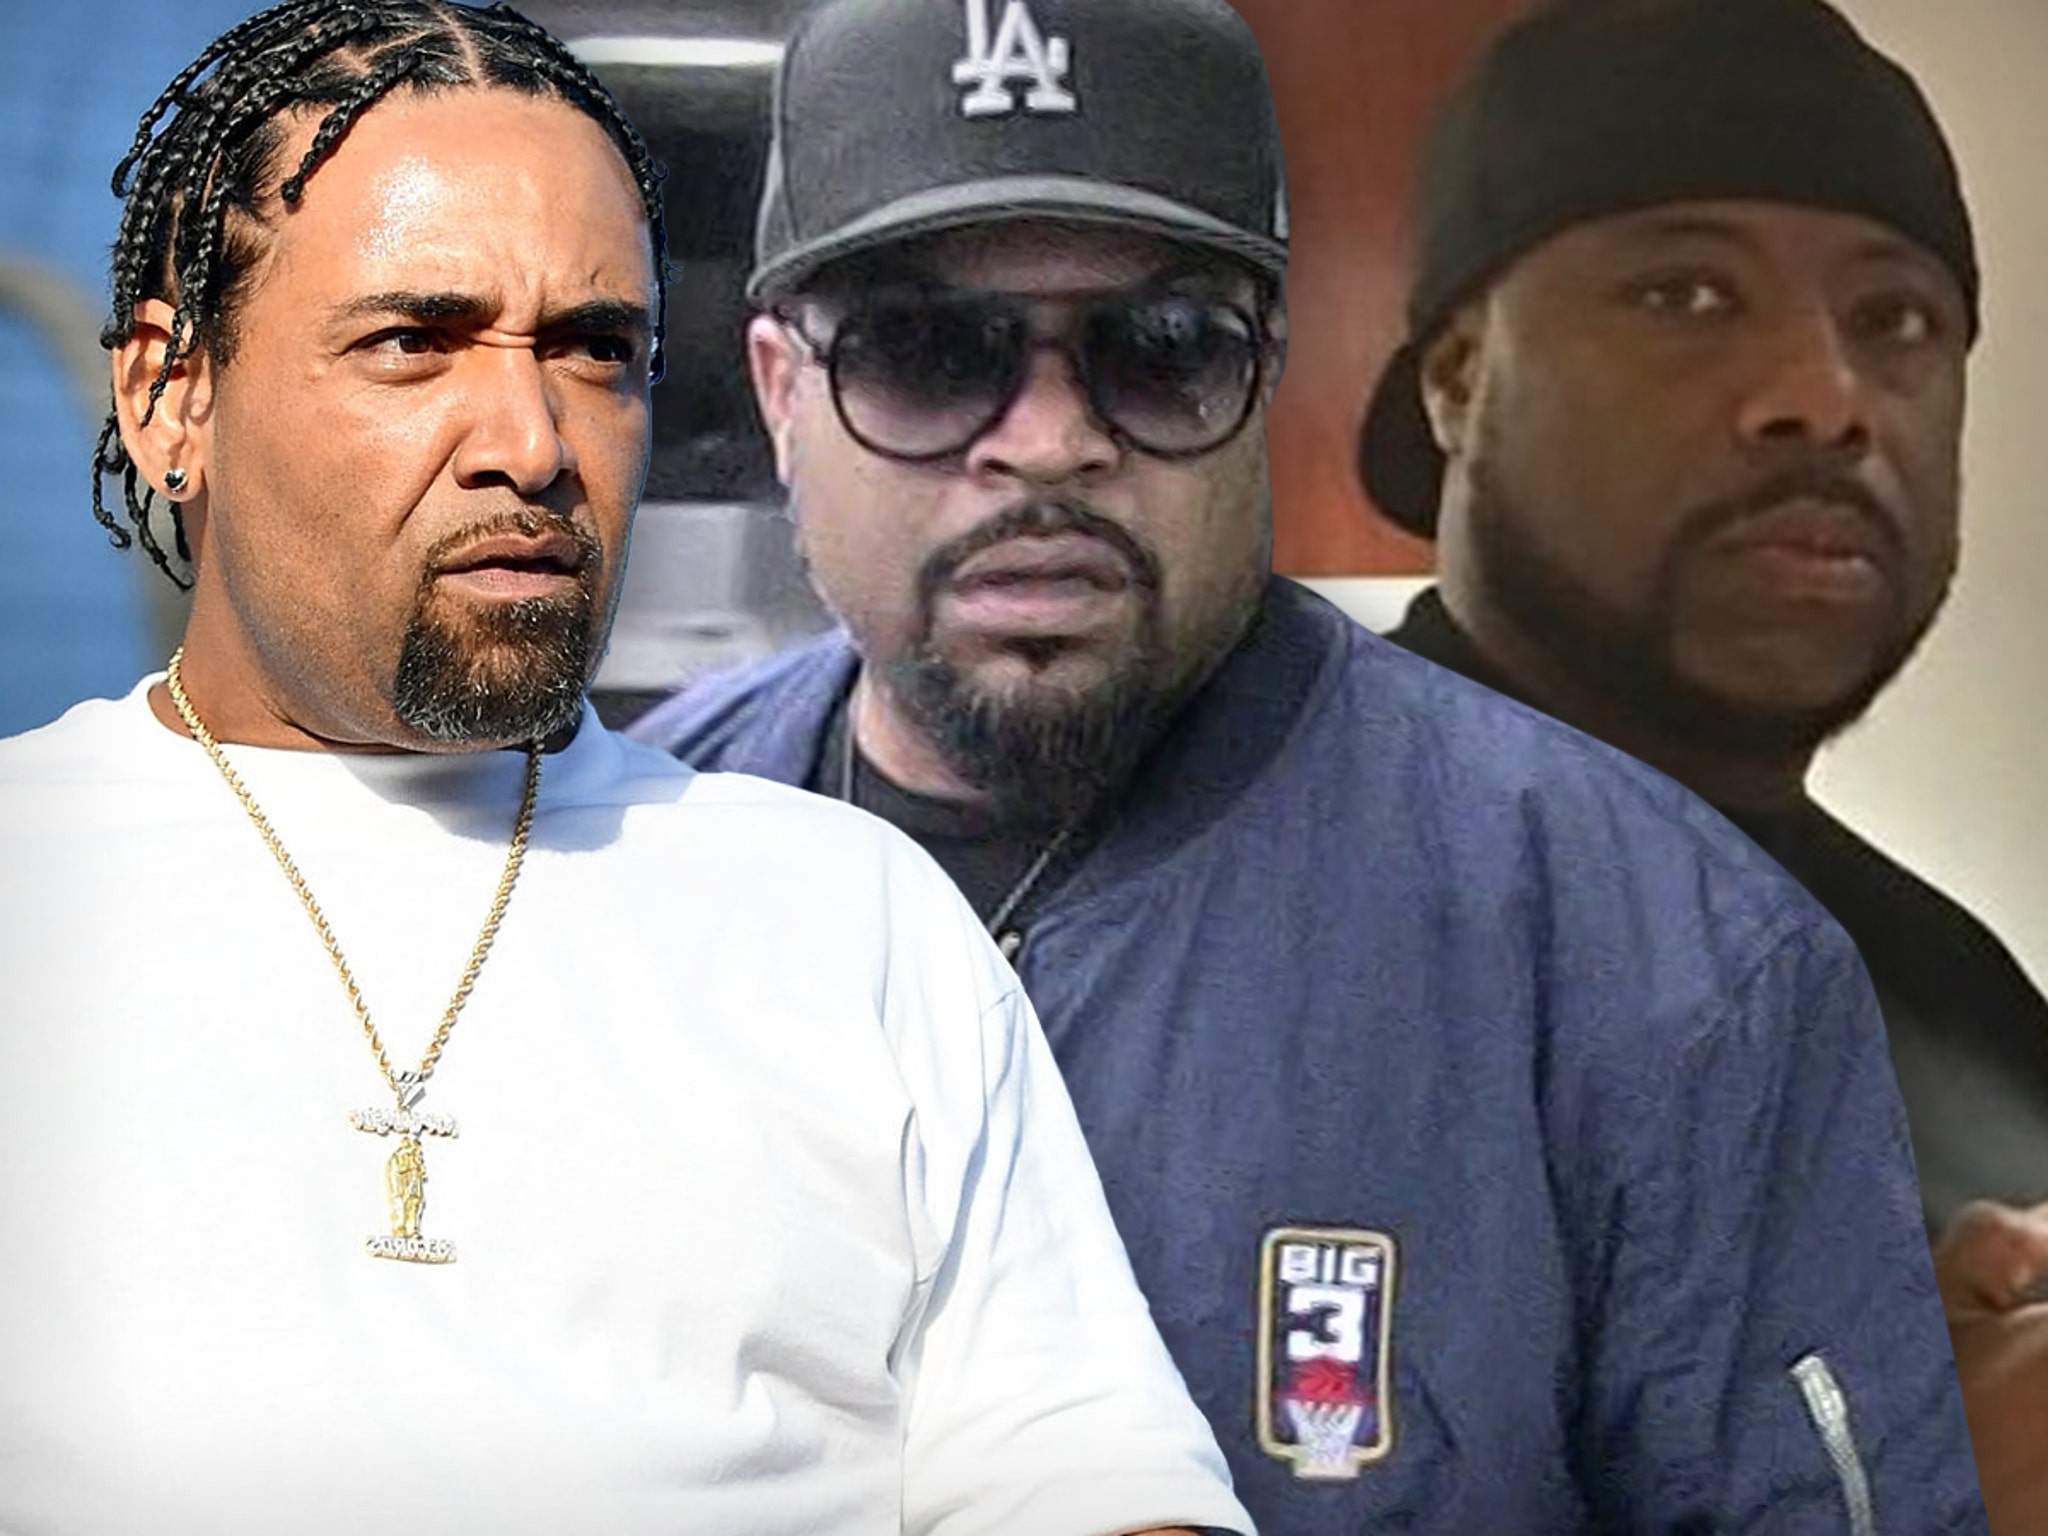 Mack 10 Says He Hasn't Spoken to Ice Cube in 20 Years